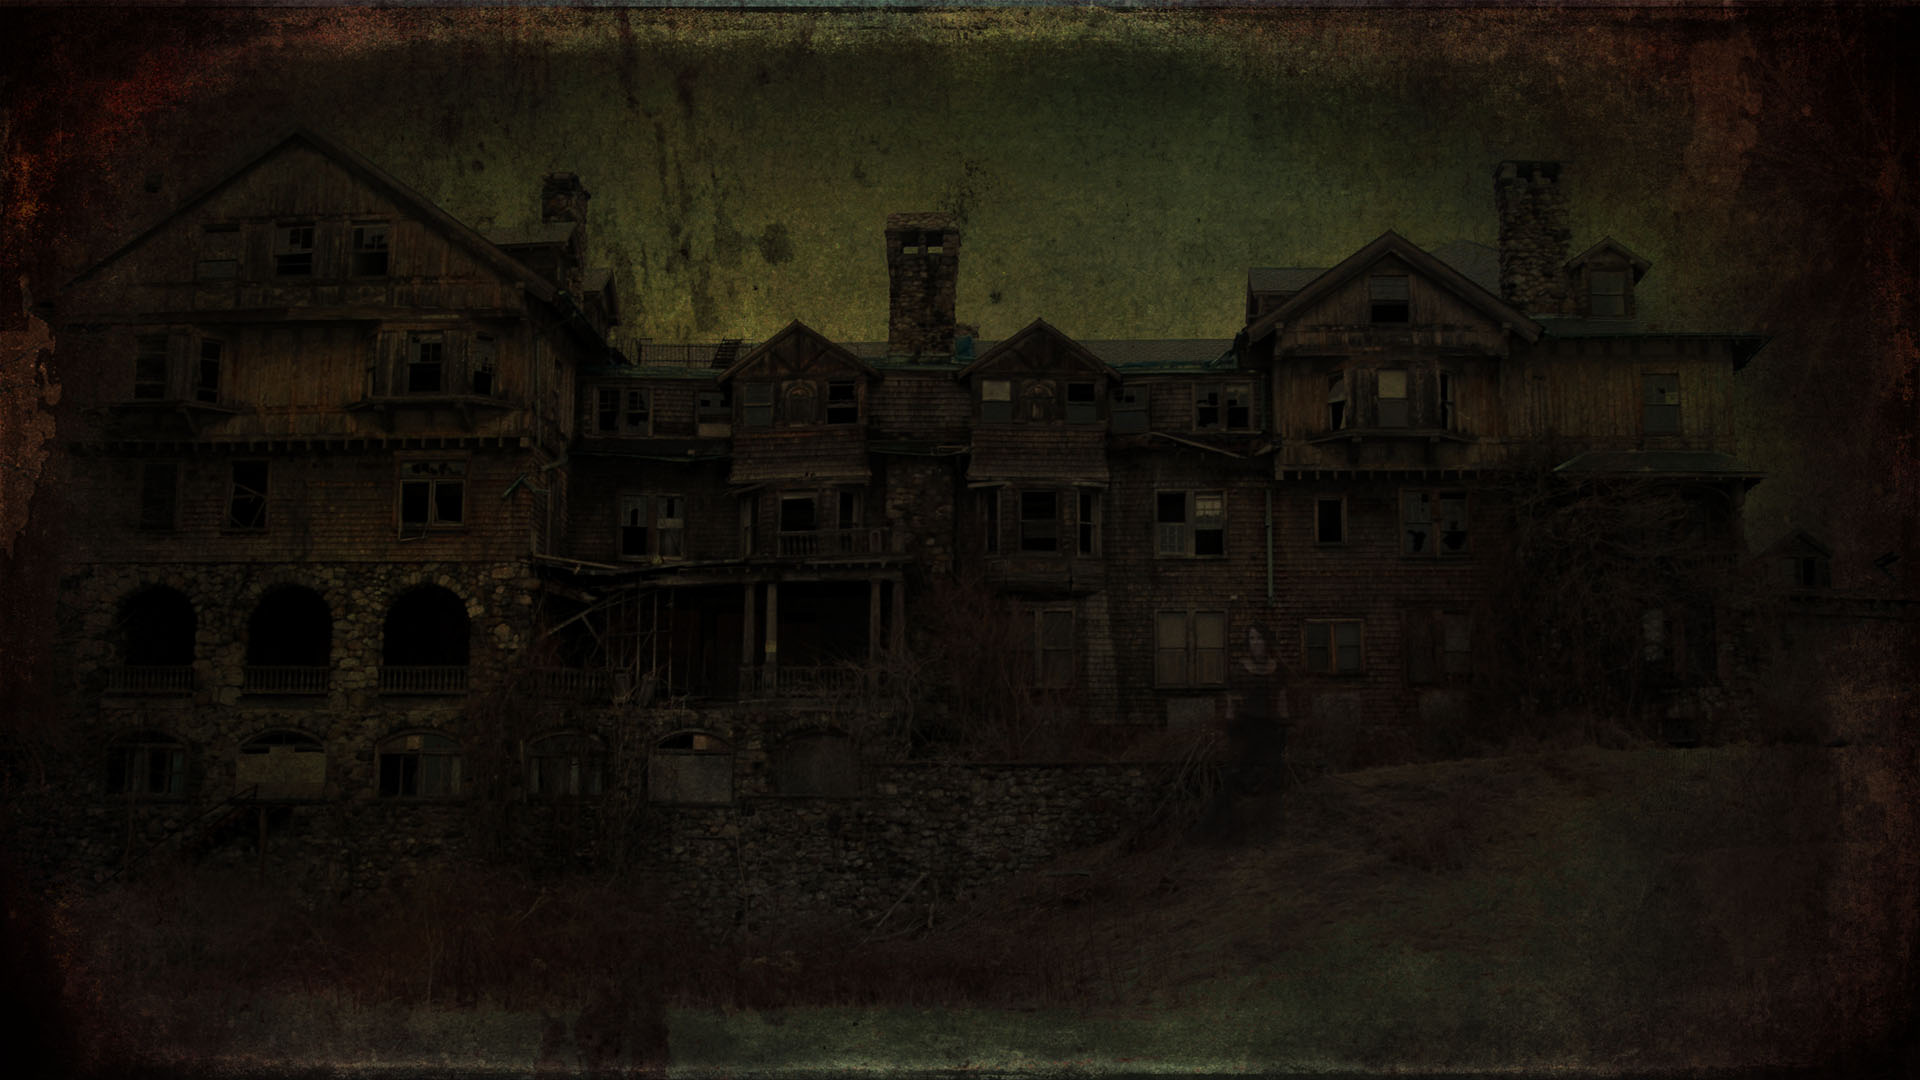 Haunted House wallpapers Haunted House stock photos